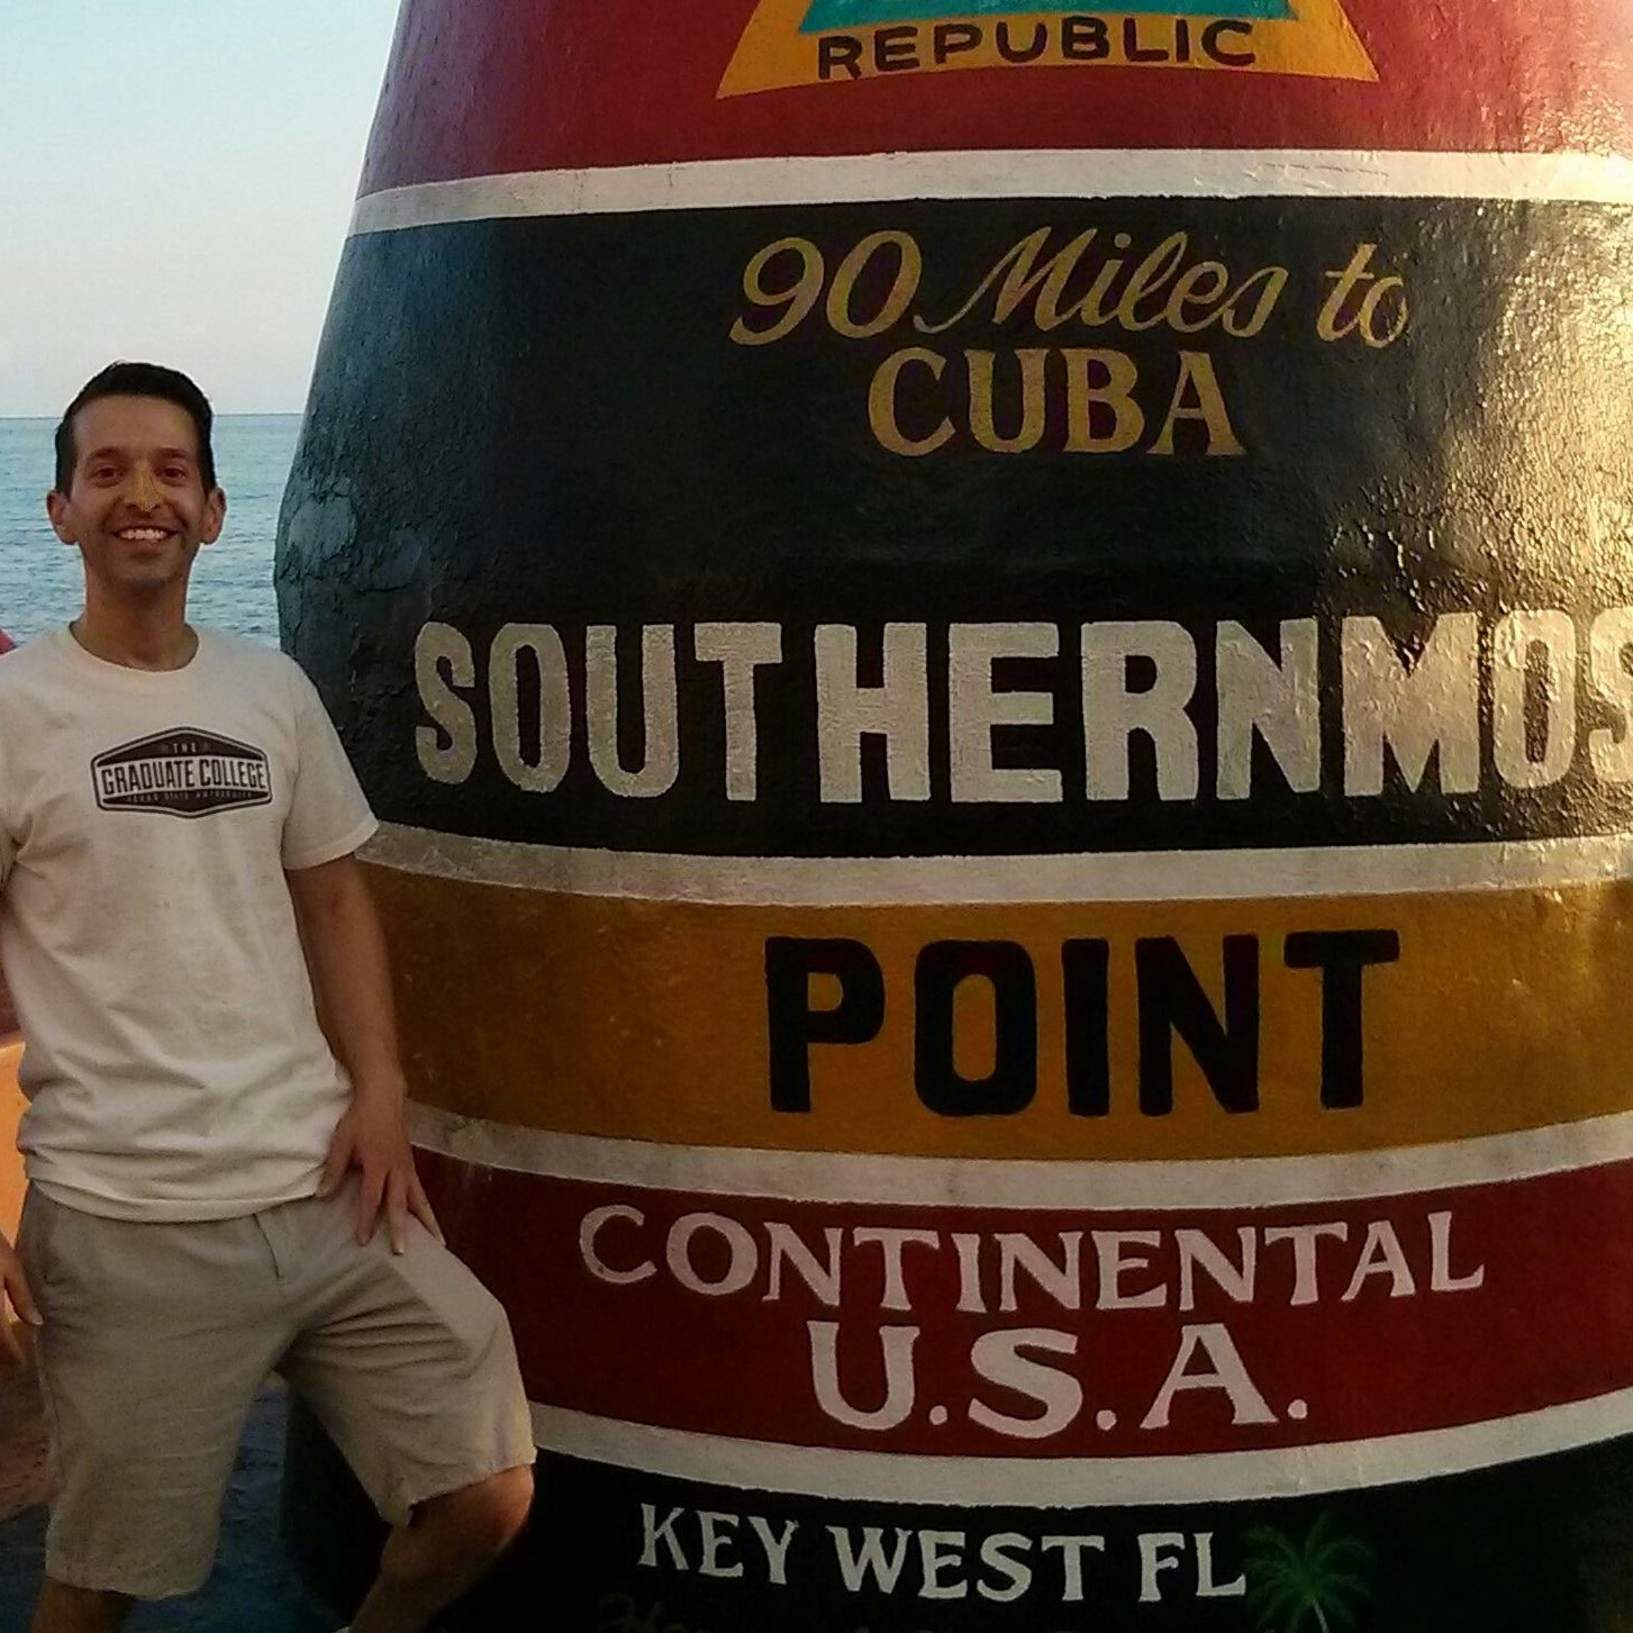 Edwardo Rodriguez200e standing at the southernmost point of the continental US in Key West, FL.